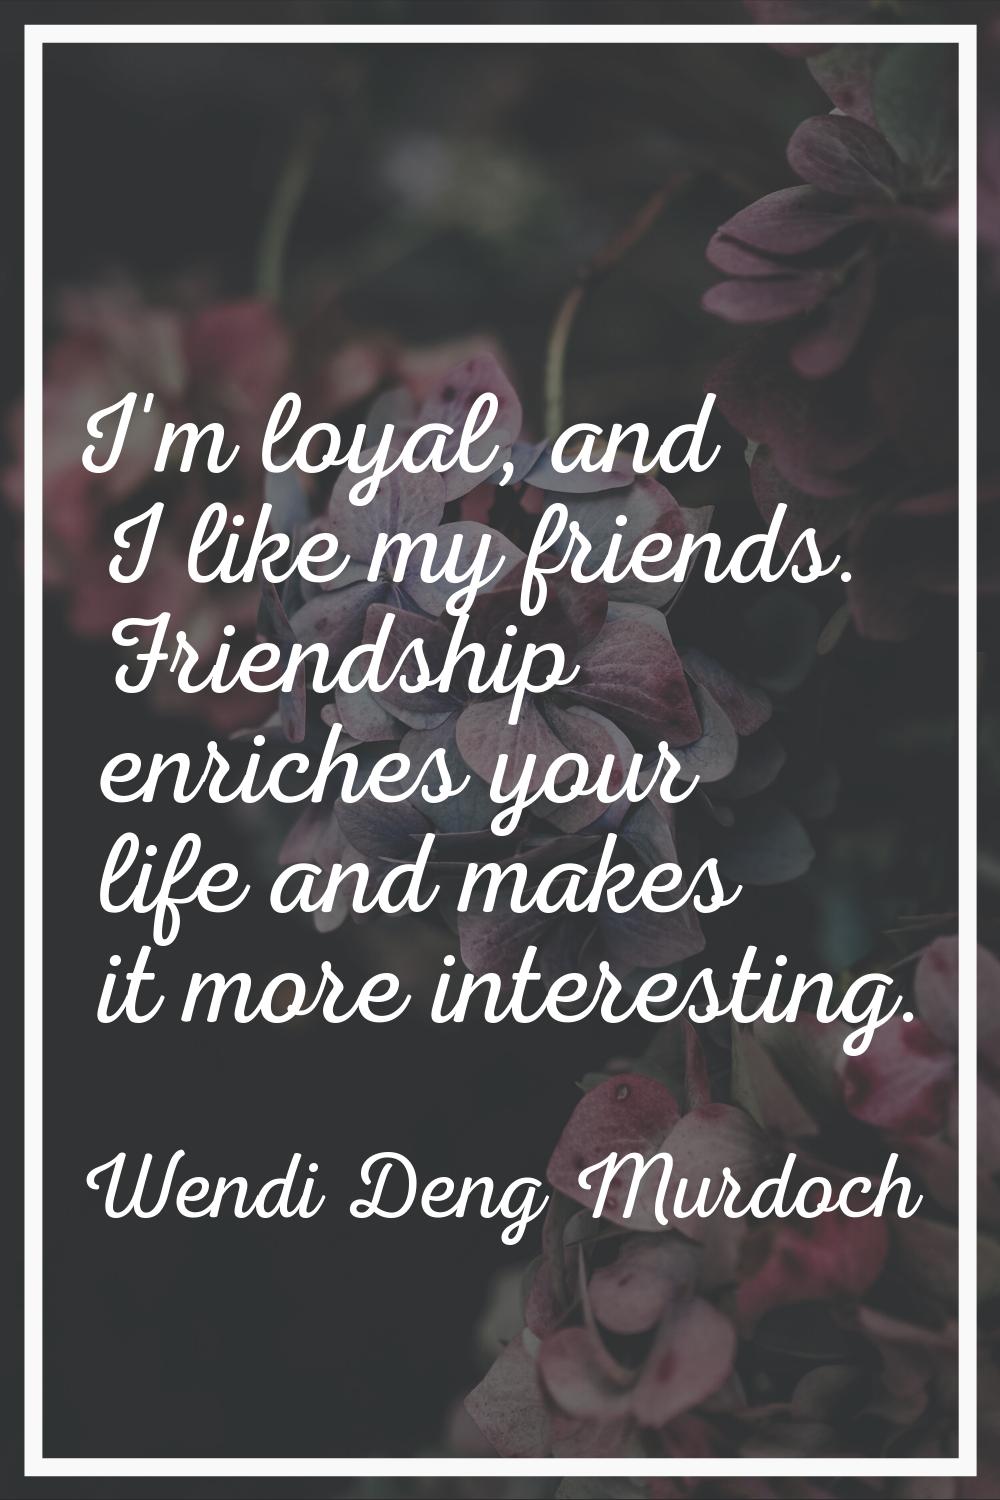 I'm loyal, and I like my friends. Friendship enriches your life and makes it more interesting.